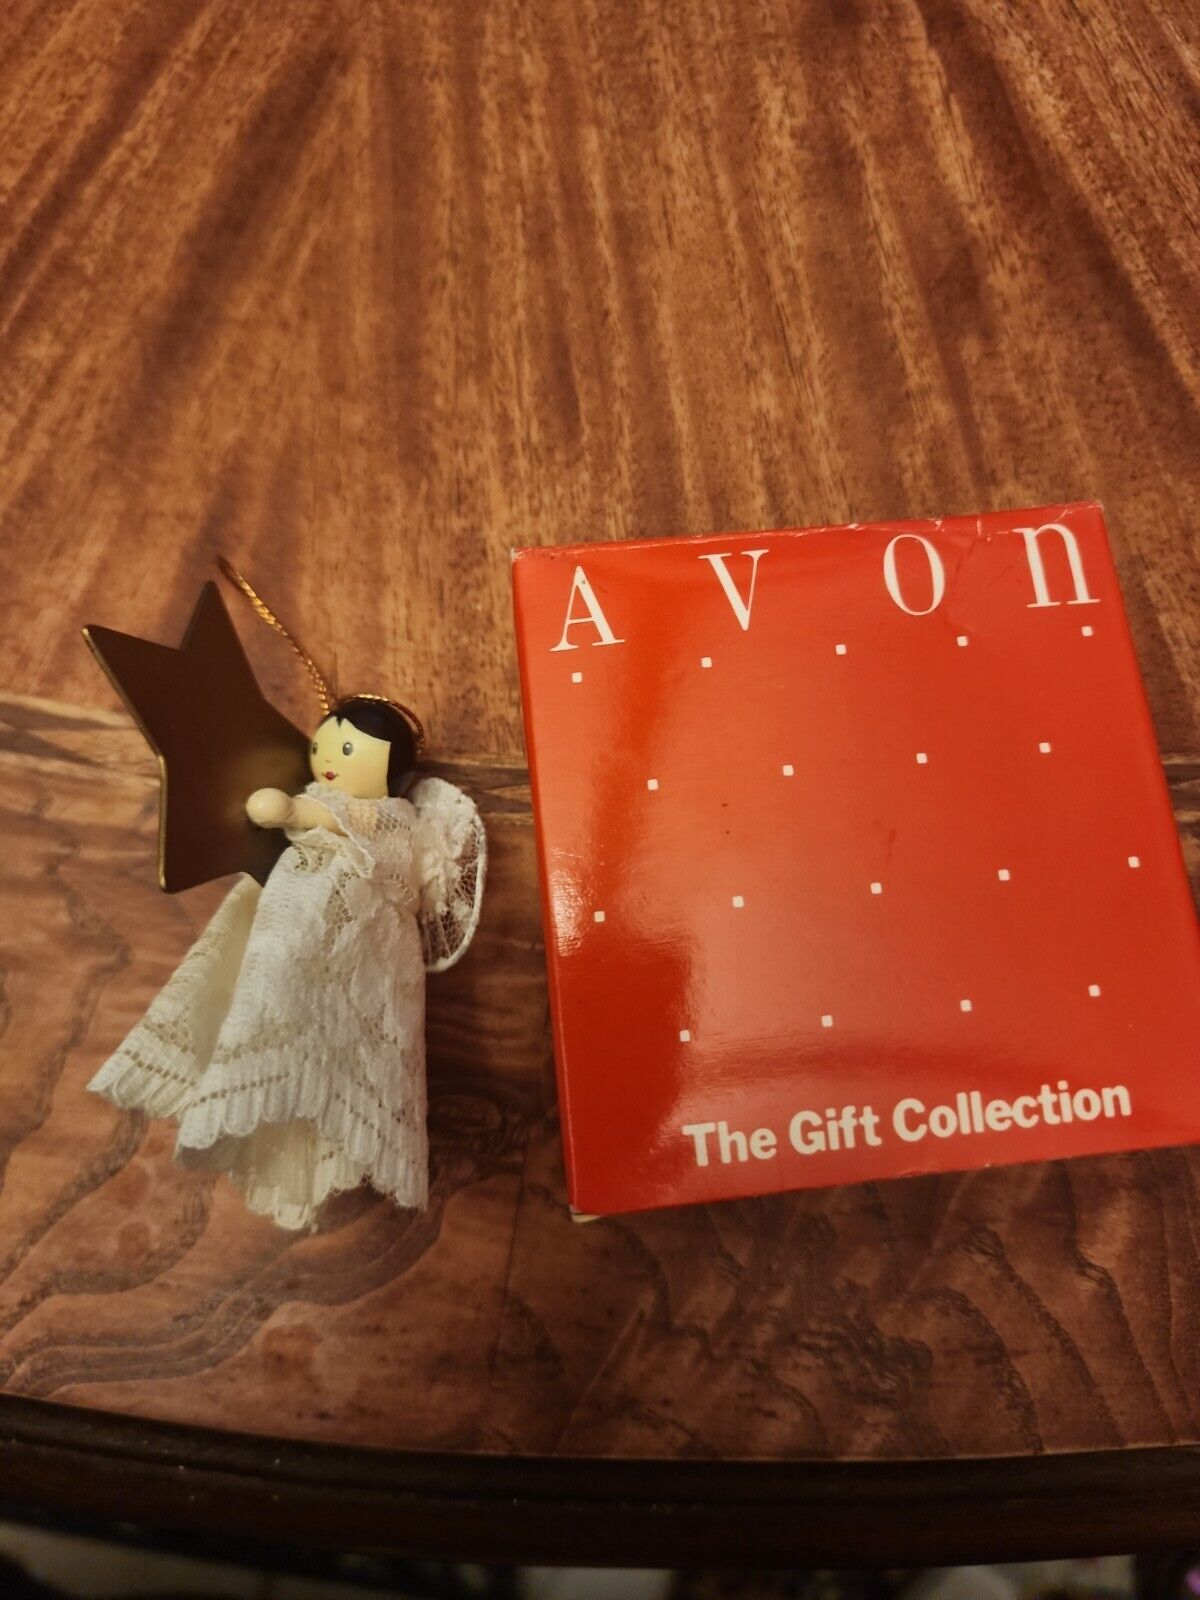 Vintage Avon Heavenly Angel Ornament with a star in a box The gift collection